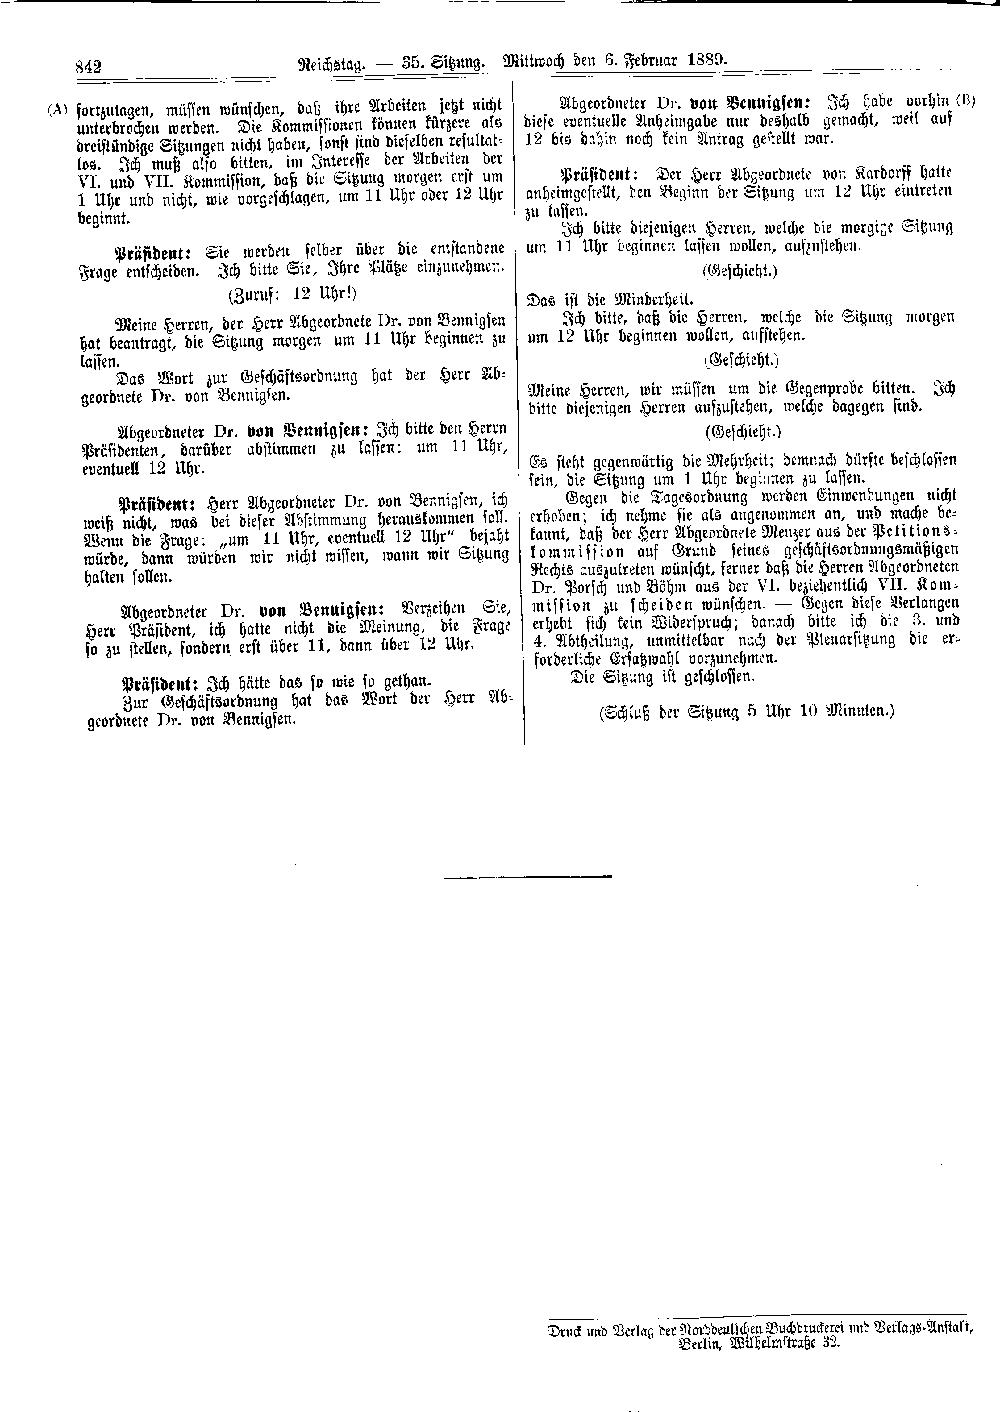 Scan of page 842